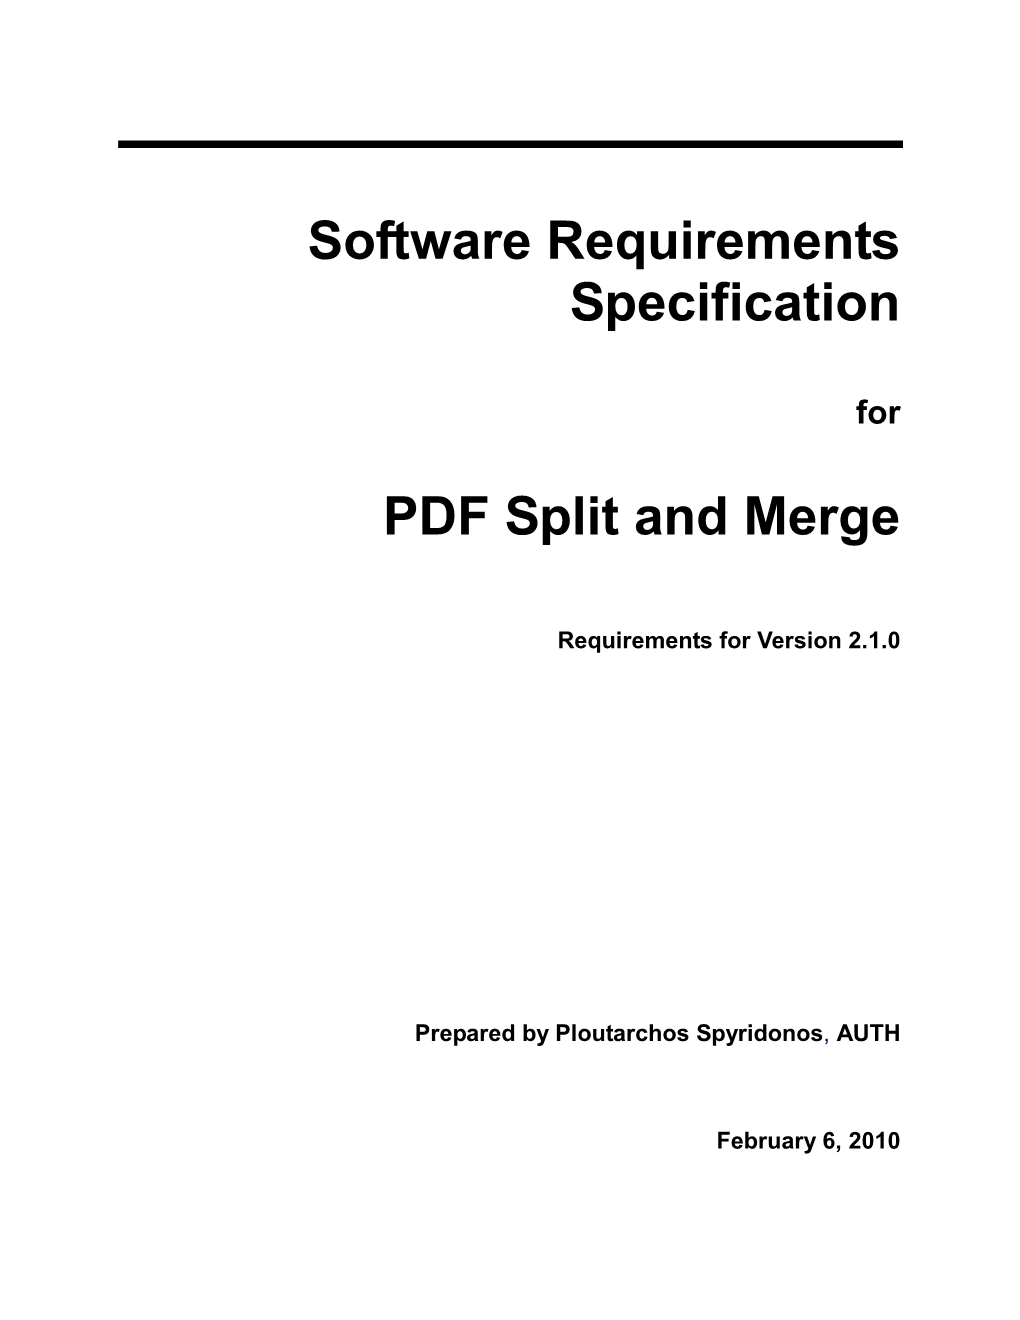 Pdfsam Is Already Implemented, Parts of This Document Have a Style Similar to a Manual Document